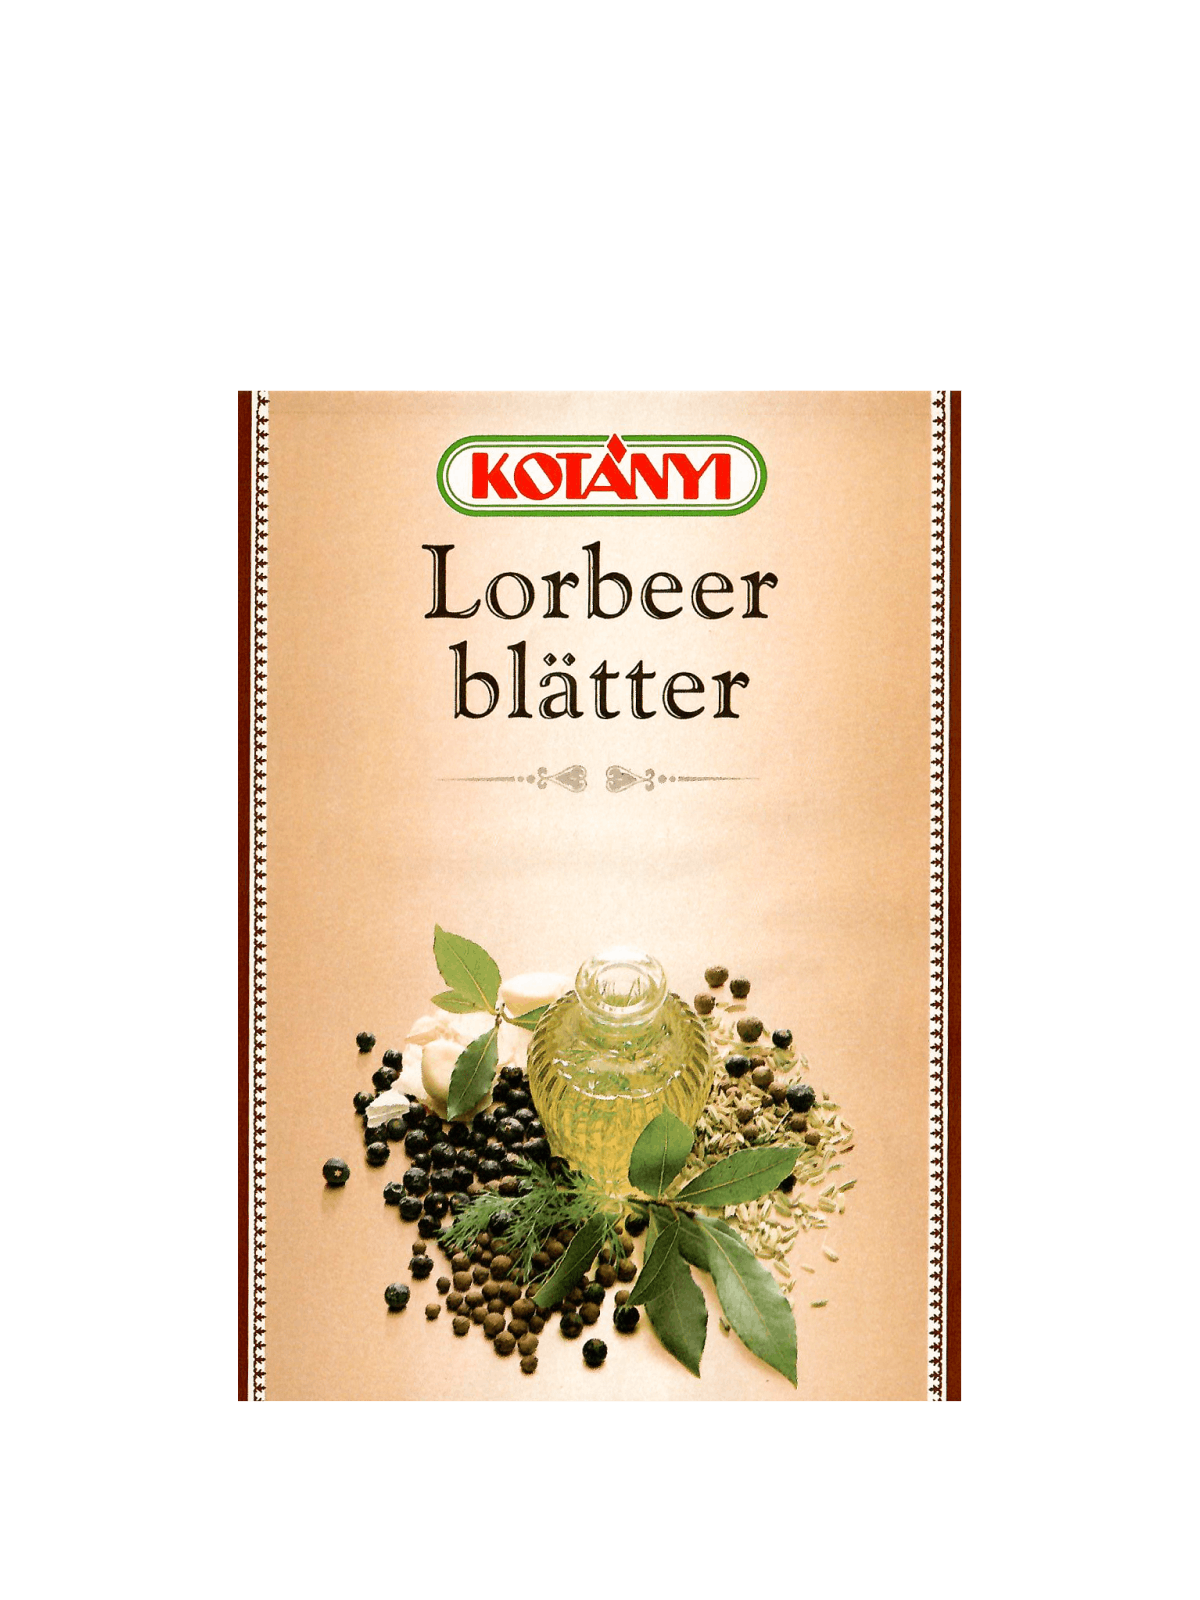 A Kotányi sachet for bay leaves from the 1990s.